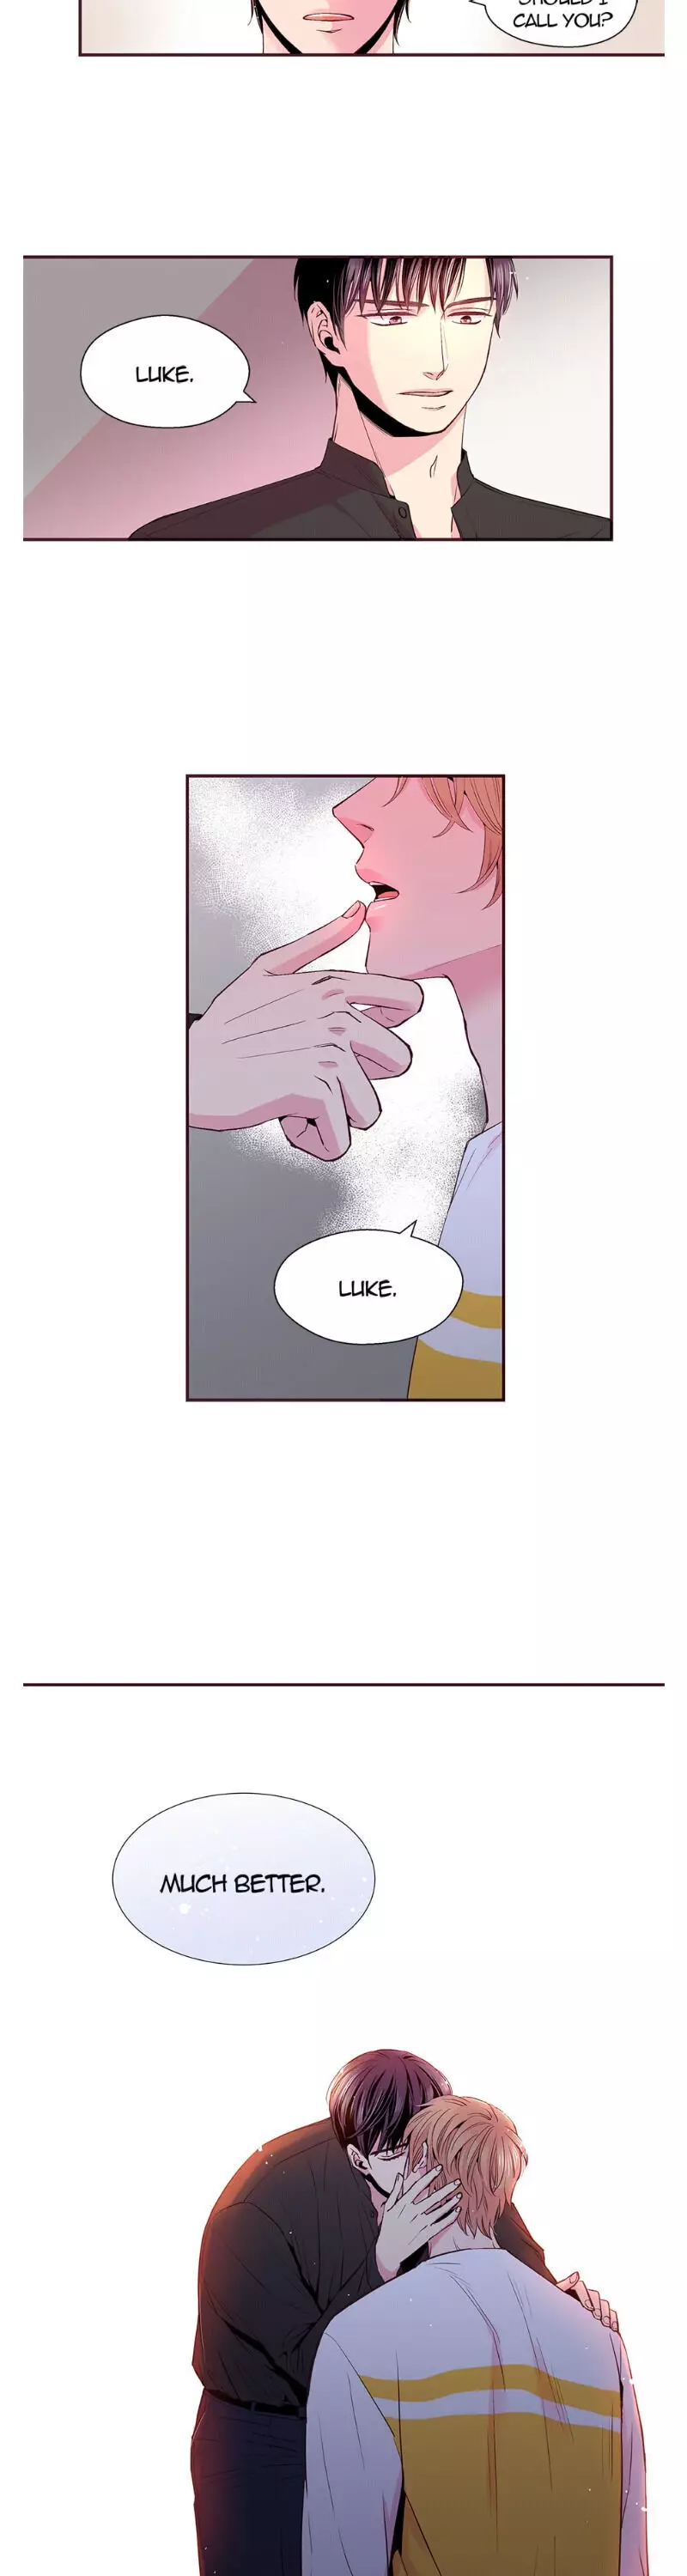 Talk To Me Tenderly - 27 page 2